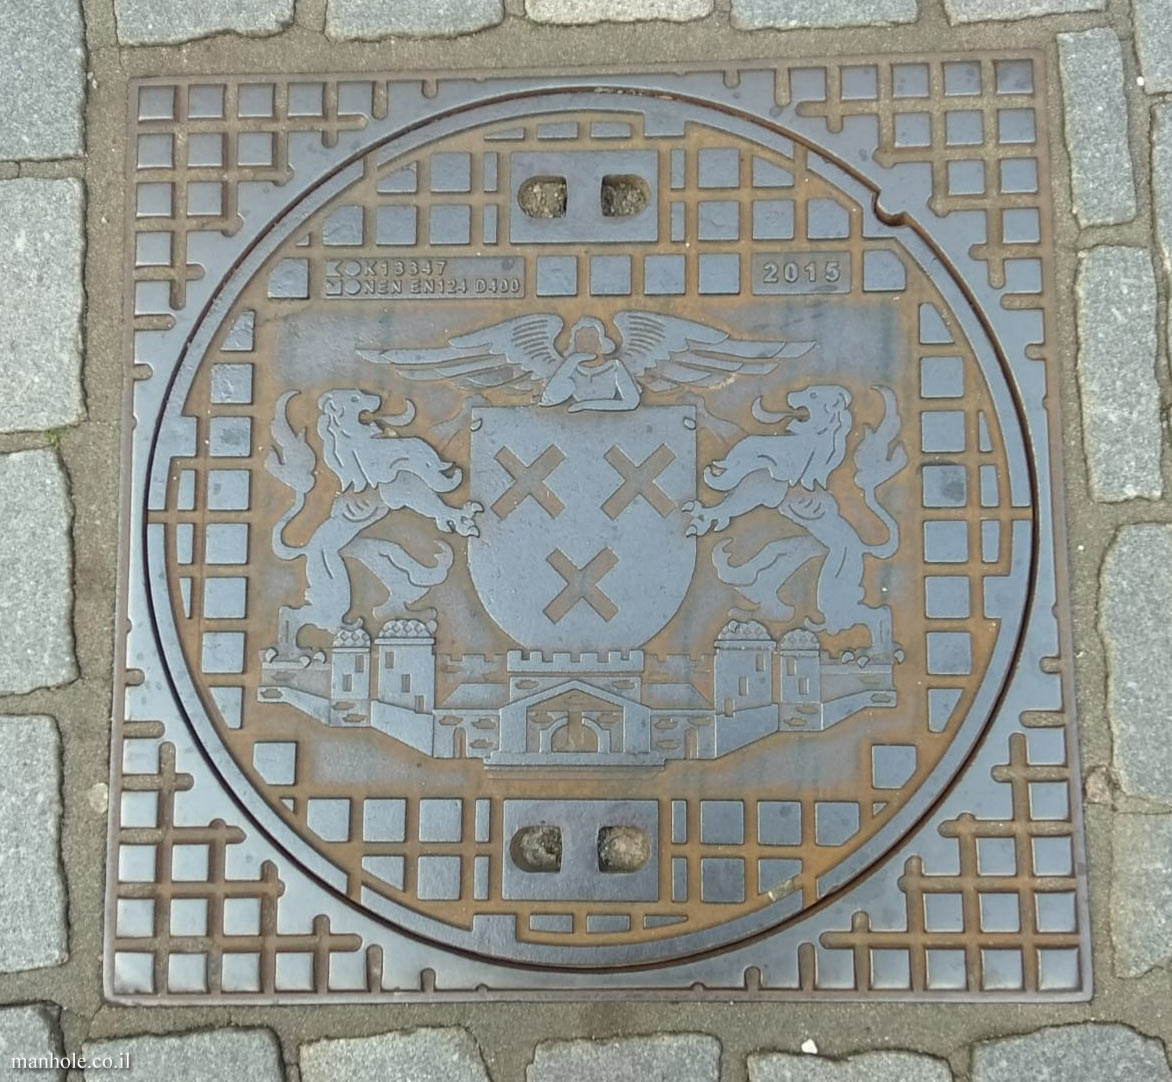 Breda - Cover with the emblem of the city  surrounded by squares